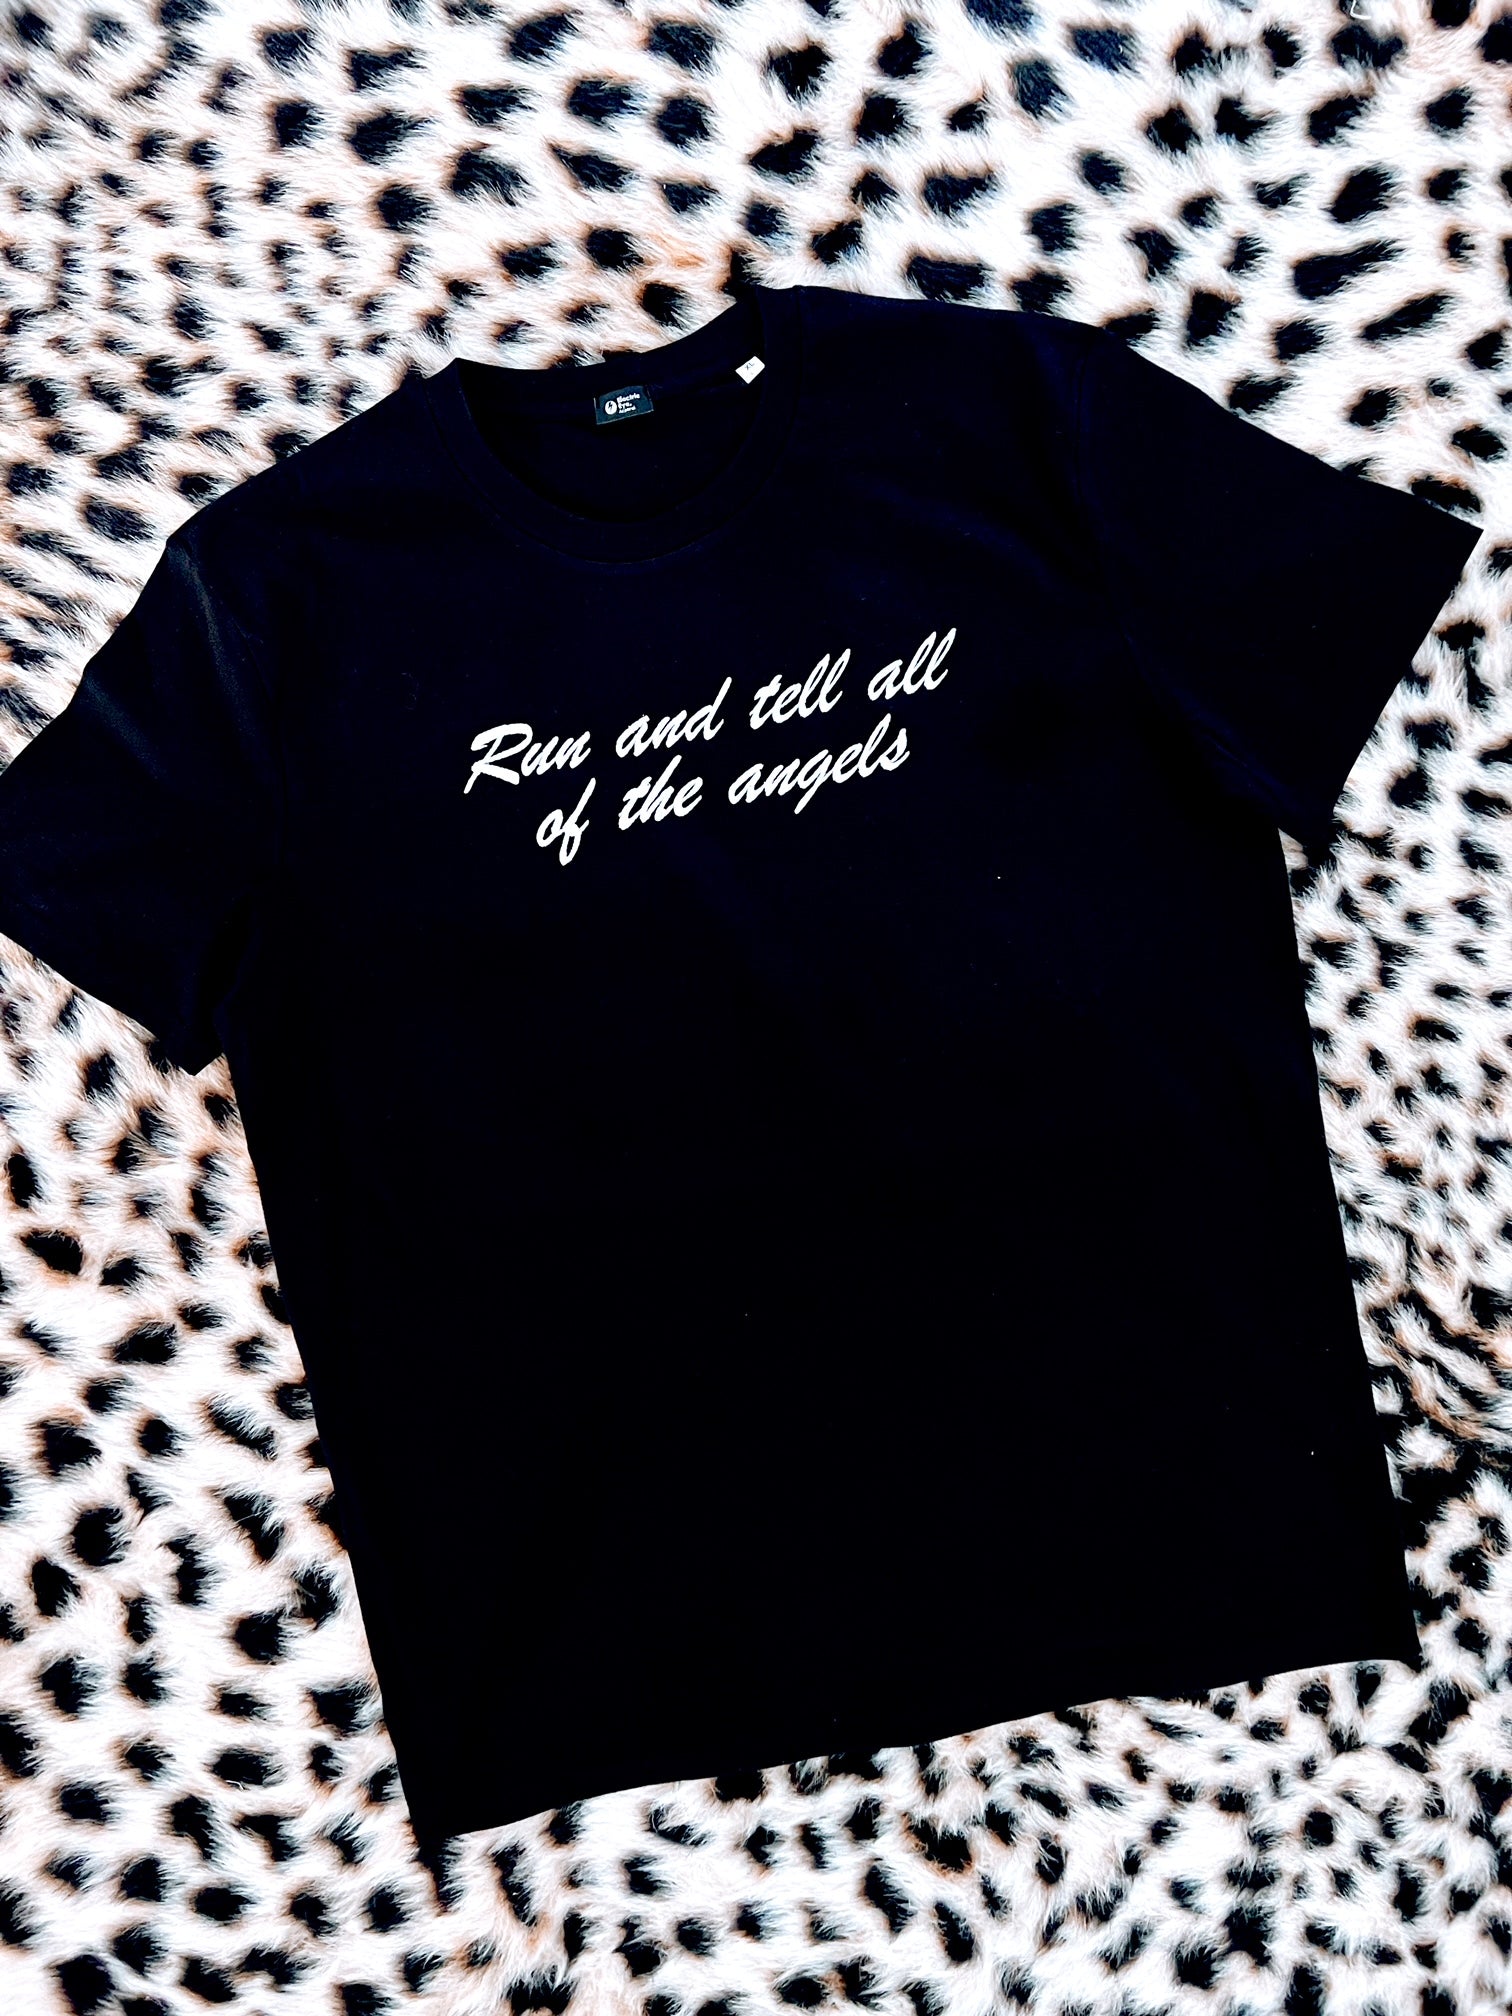 'RUN AND TELL ALL OF THE ANGELS' EMBROIDERED UNISEX MEDIUM FIT ORGANIC COTTON 'ROCKER' T-SHIRT